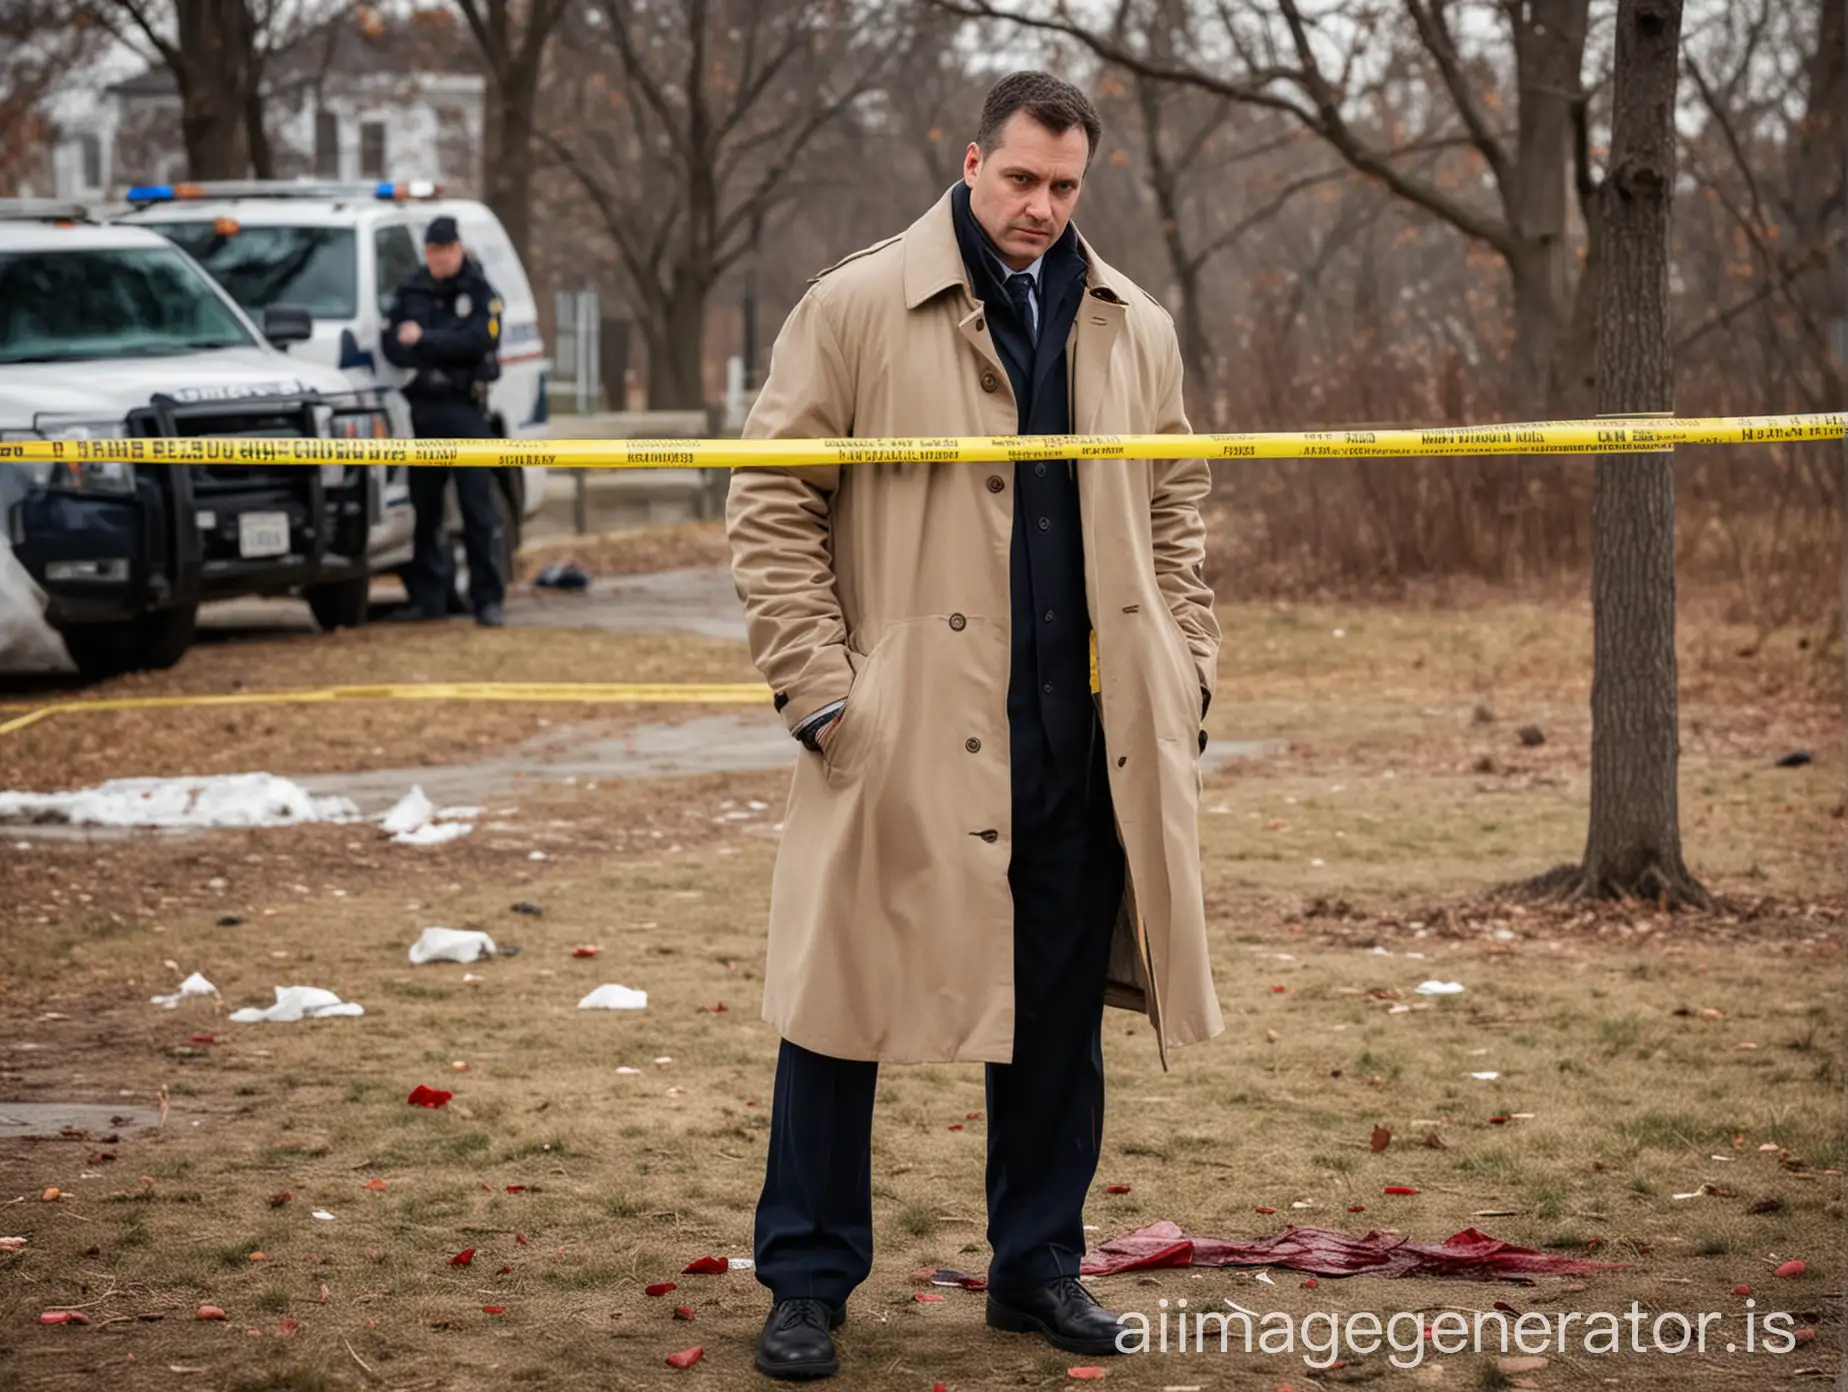 Winter-Coat-Detective-Investigating-Crime-Scene-with-Blood-Stains